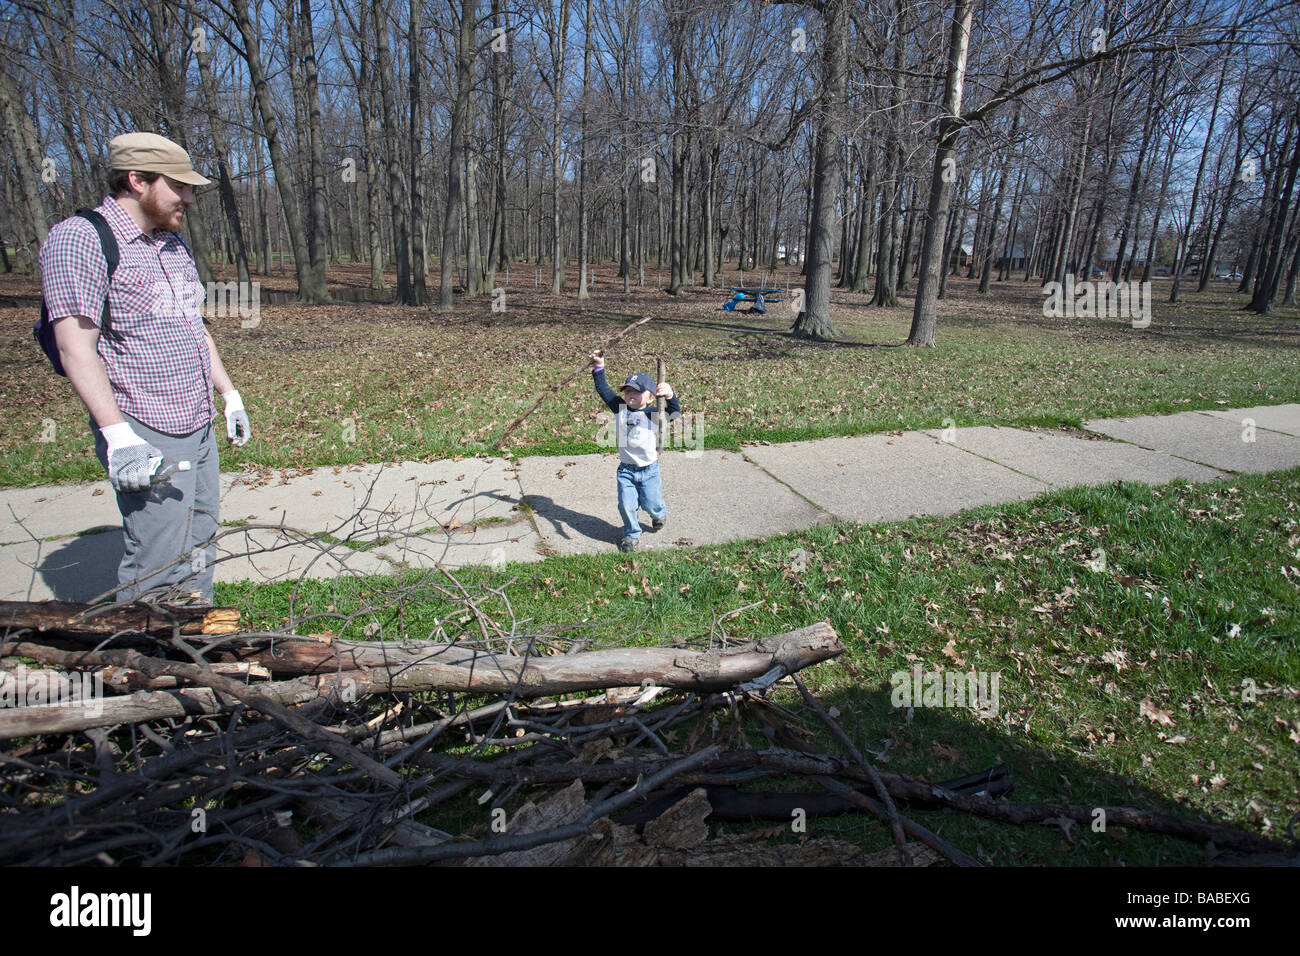 Detroit Michigan A boy helps his dad during a community cleanup of Balduck Park Stock Photo